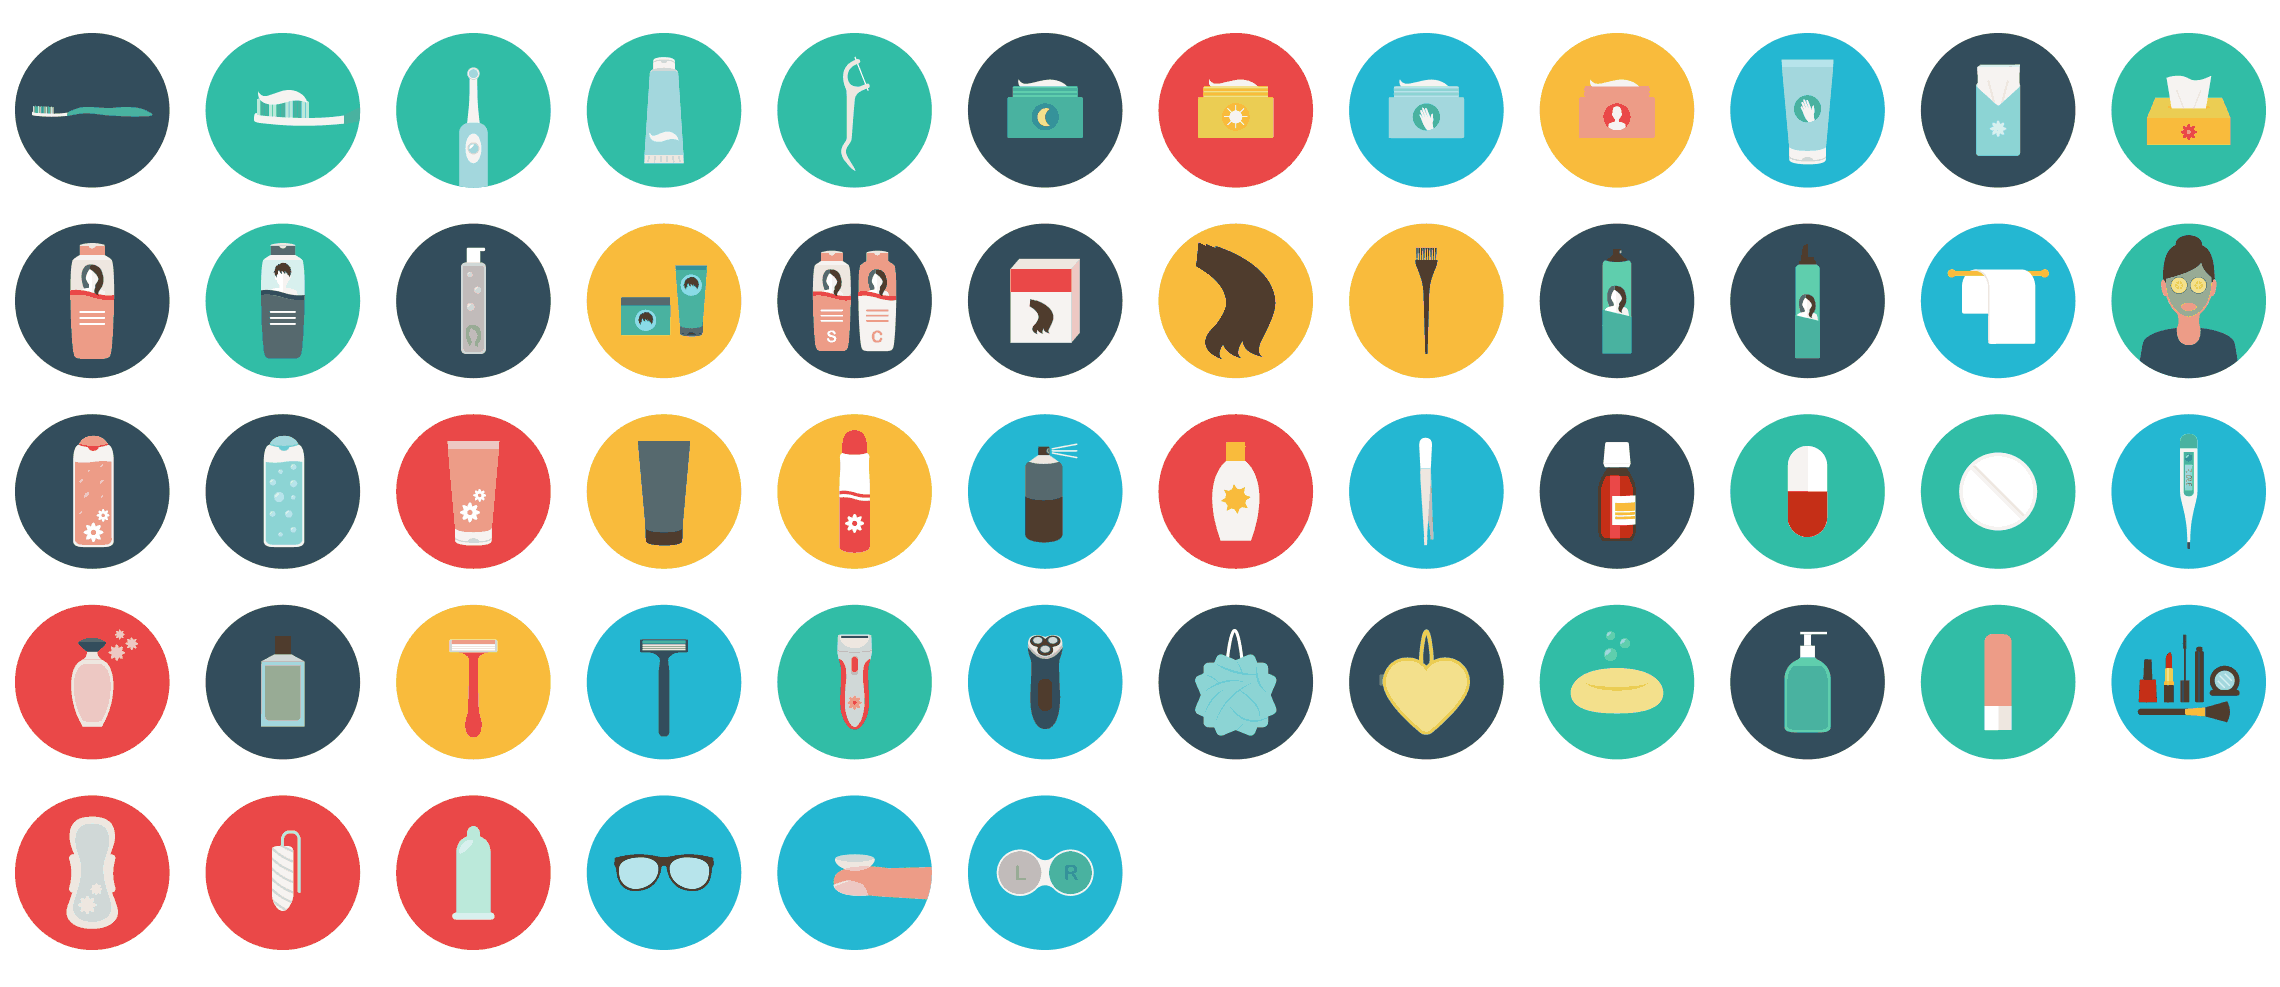 drugstore-flat-icons-vol-1-preview